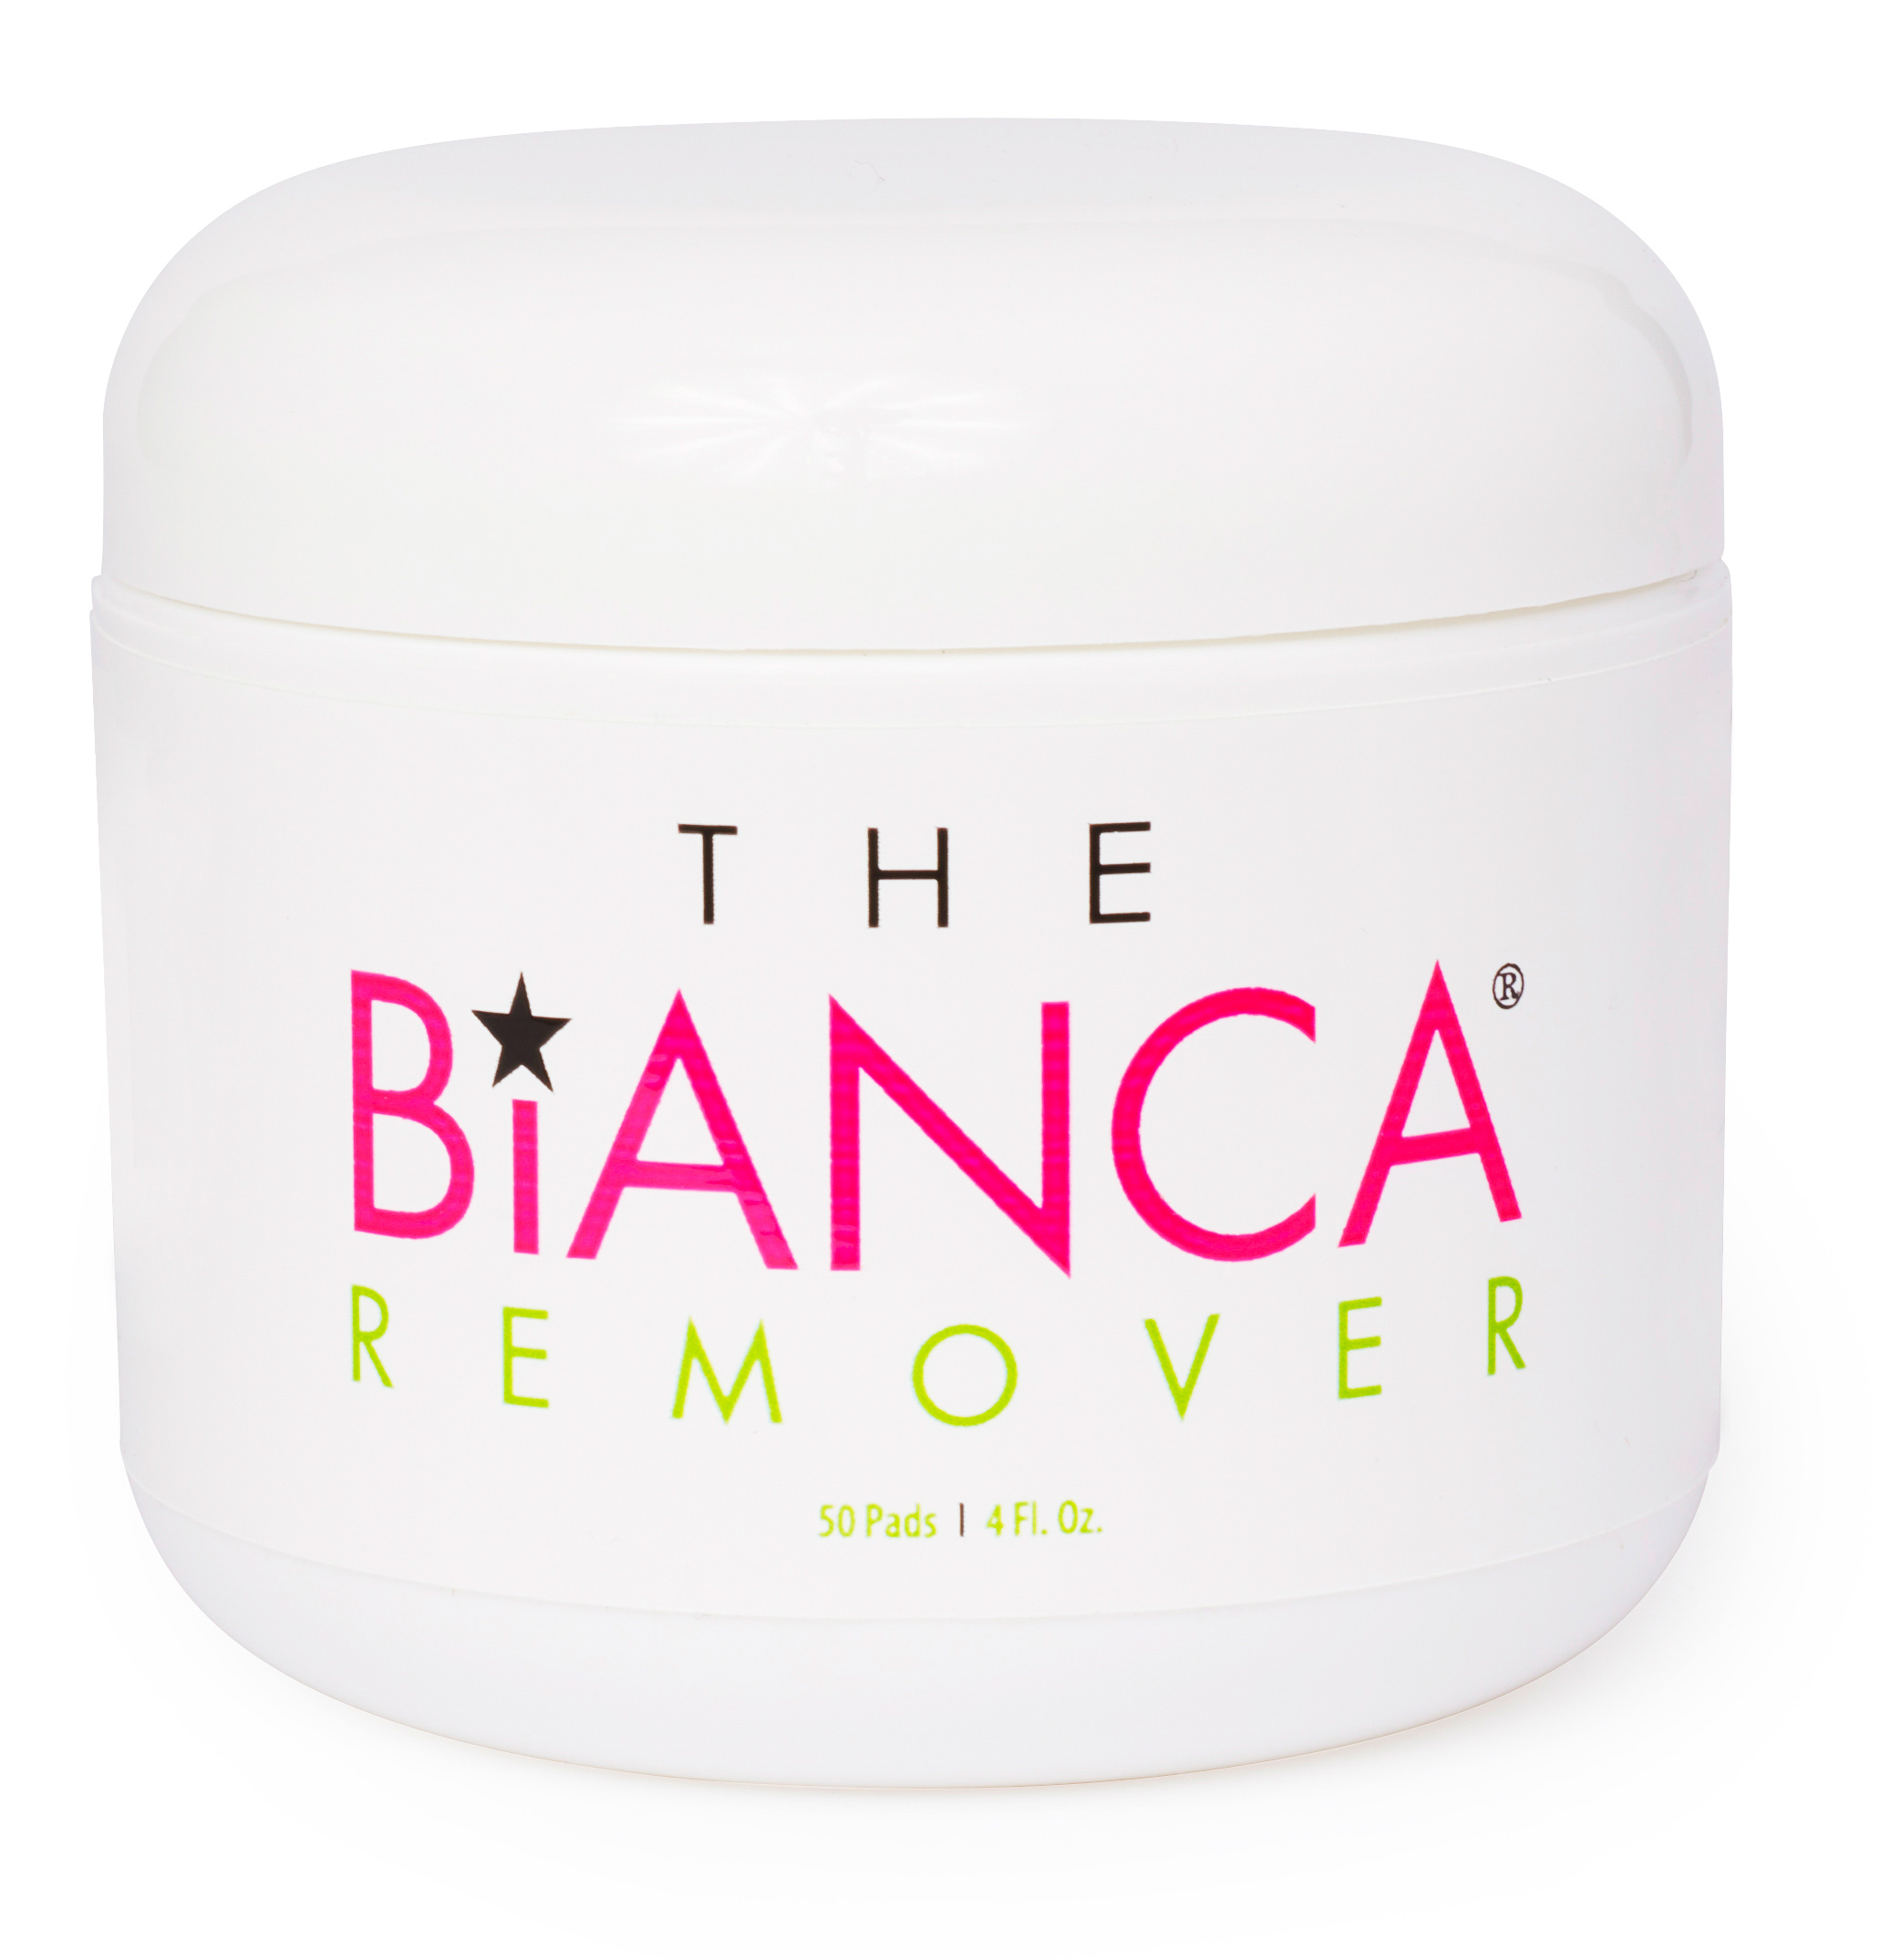 The Bianca Remover